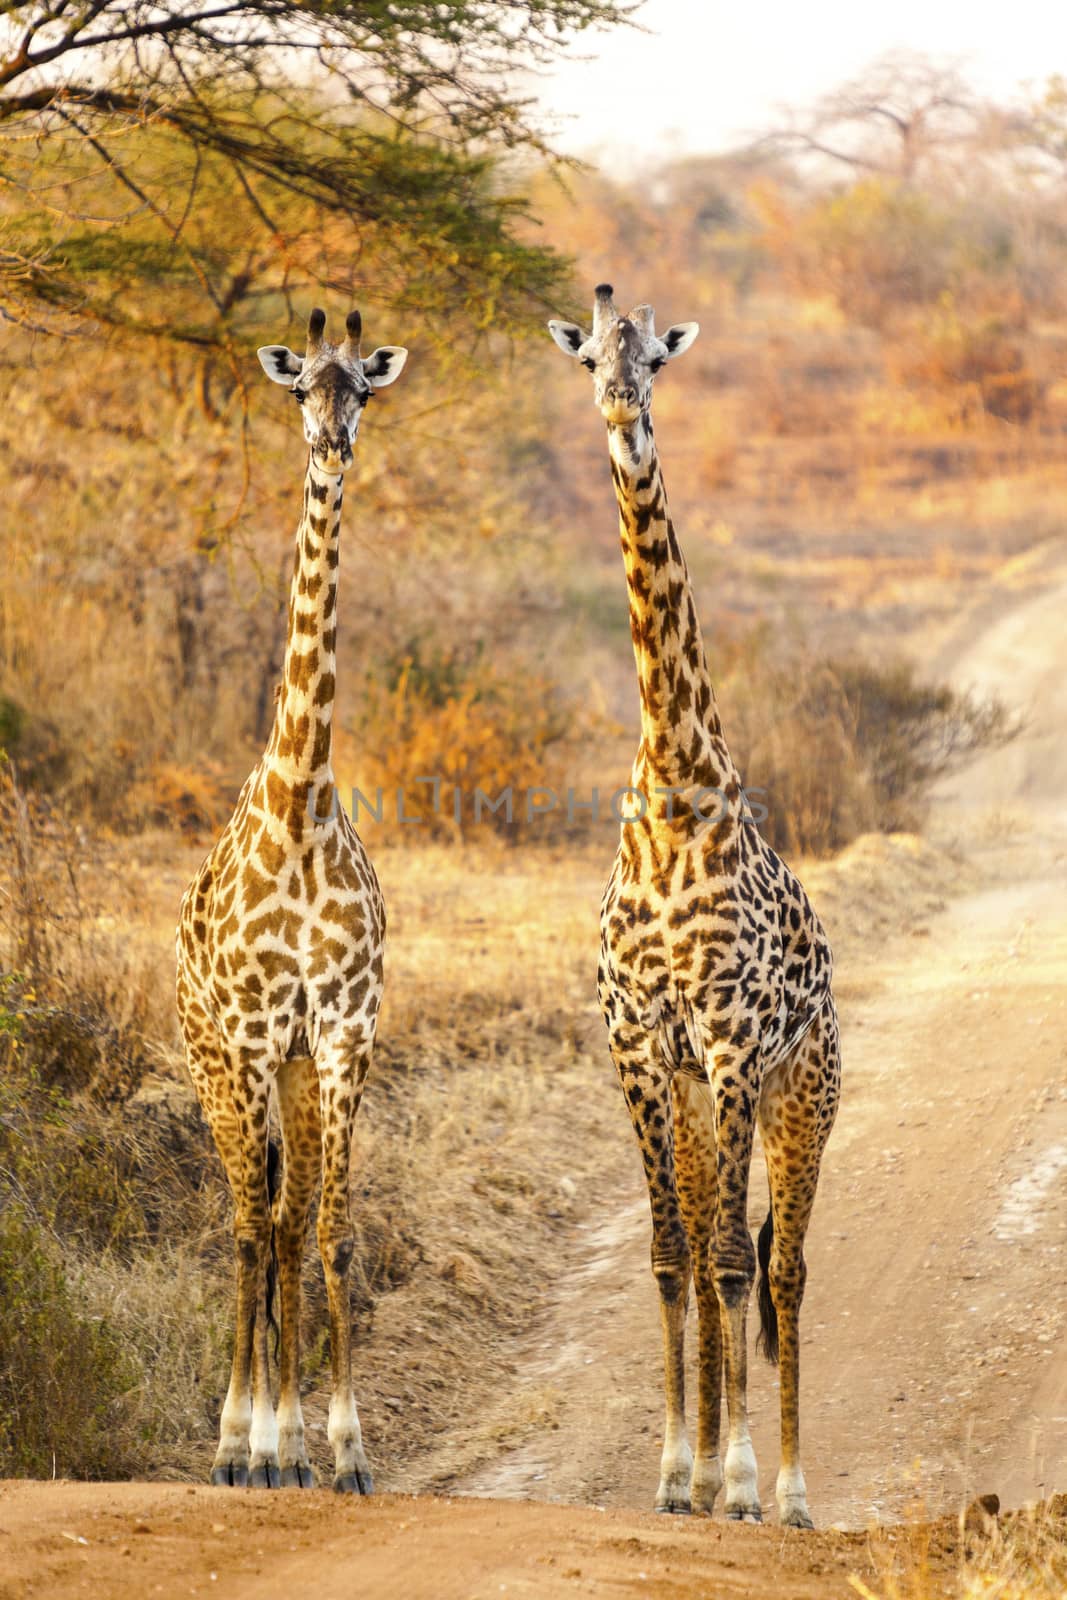 Two giraffes on the road in Africa